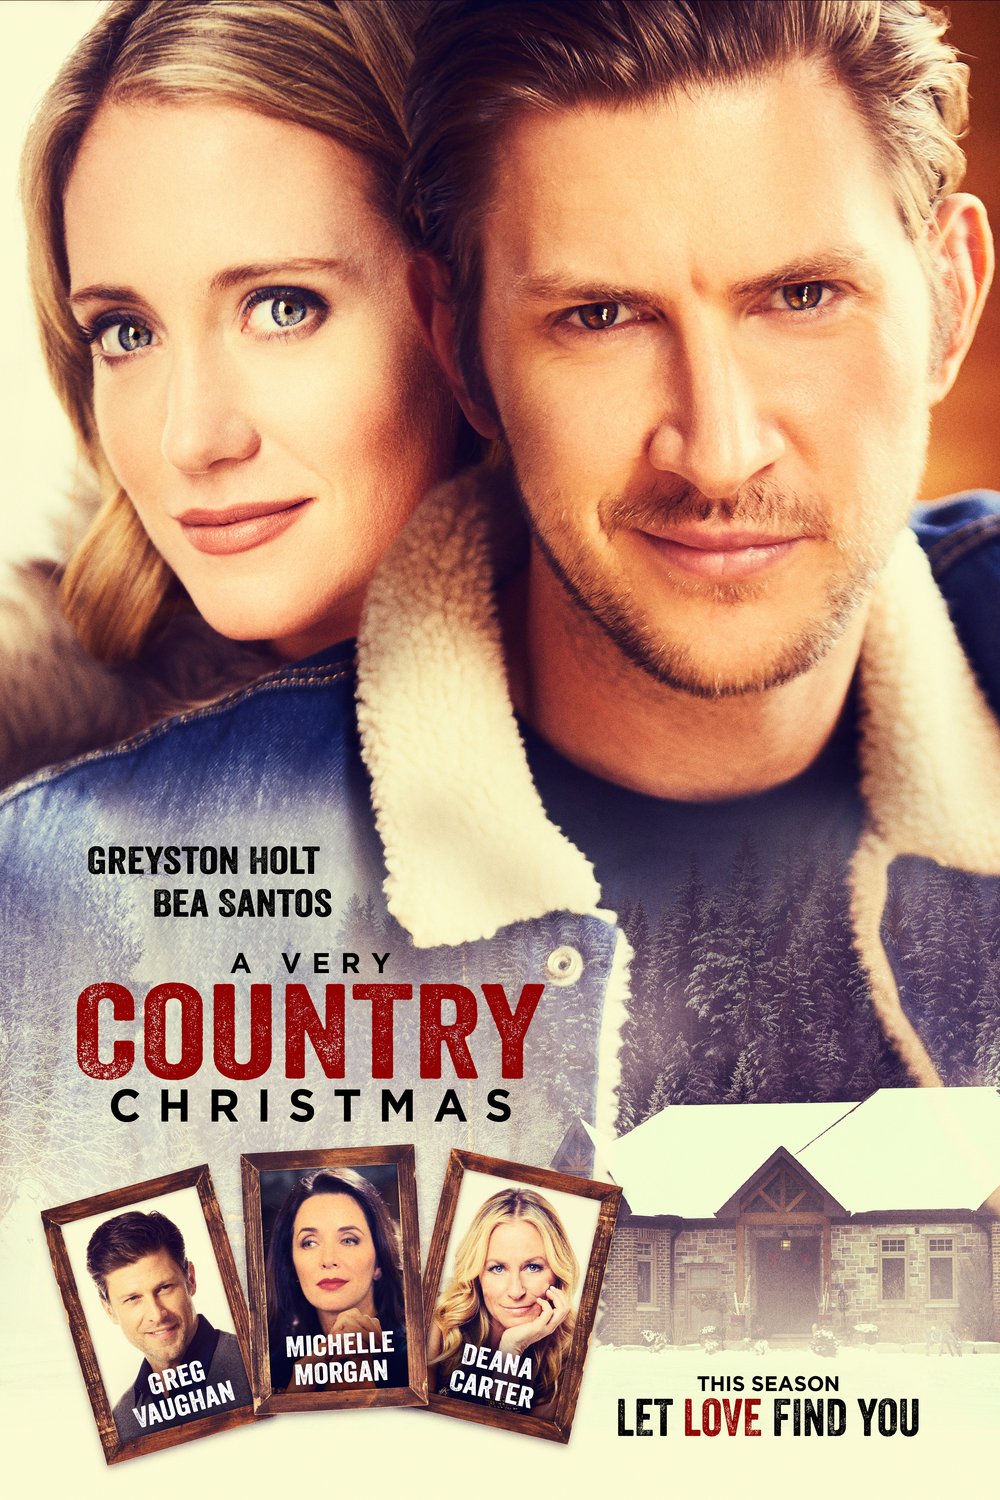 Poster of the movie A Very Country Christmas